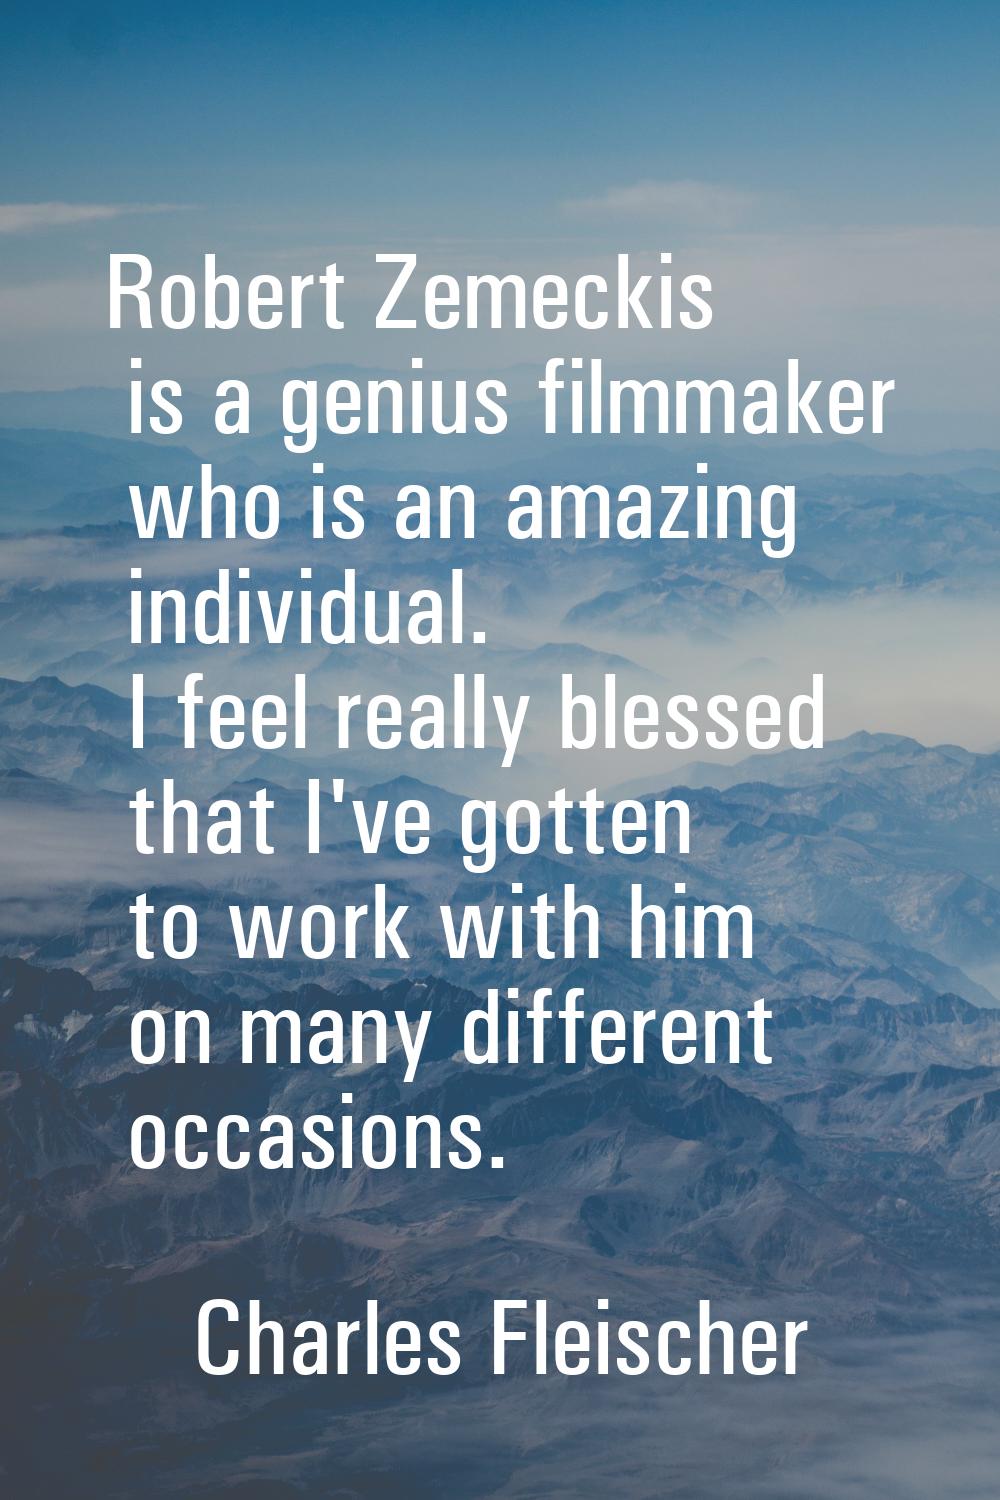 Robert Zemeckis is a genius filmmaker who is an amazing individual. I feel really blessed that I've